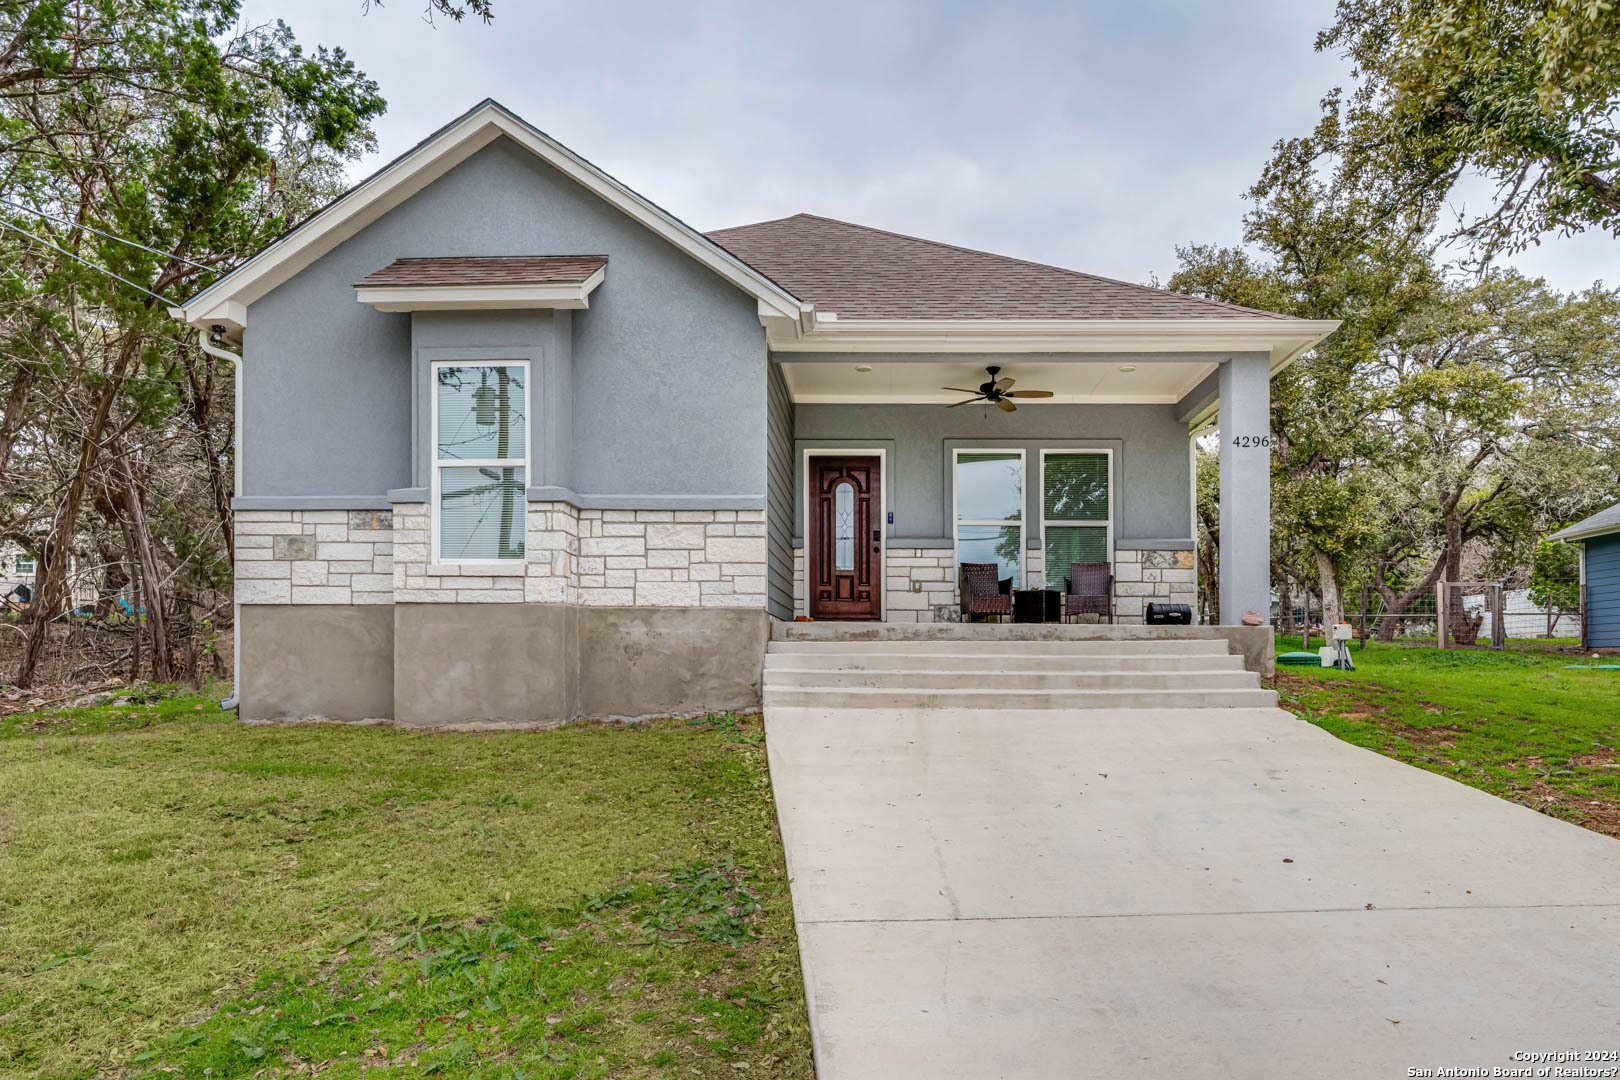 Photo of 4296 Morningside Wy in Canyon Lake, TX